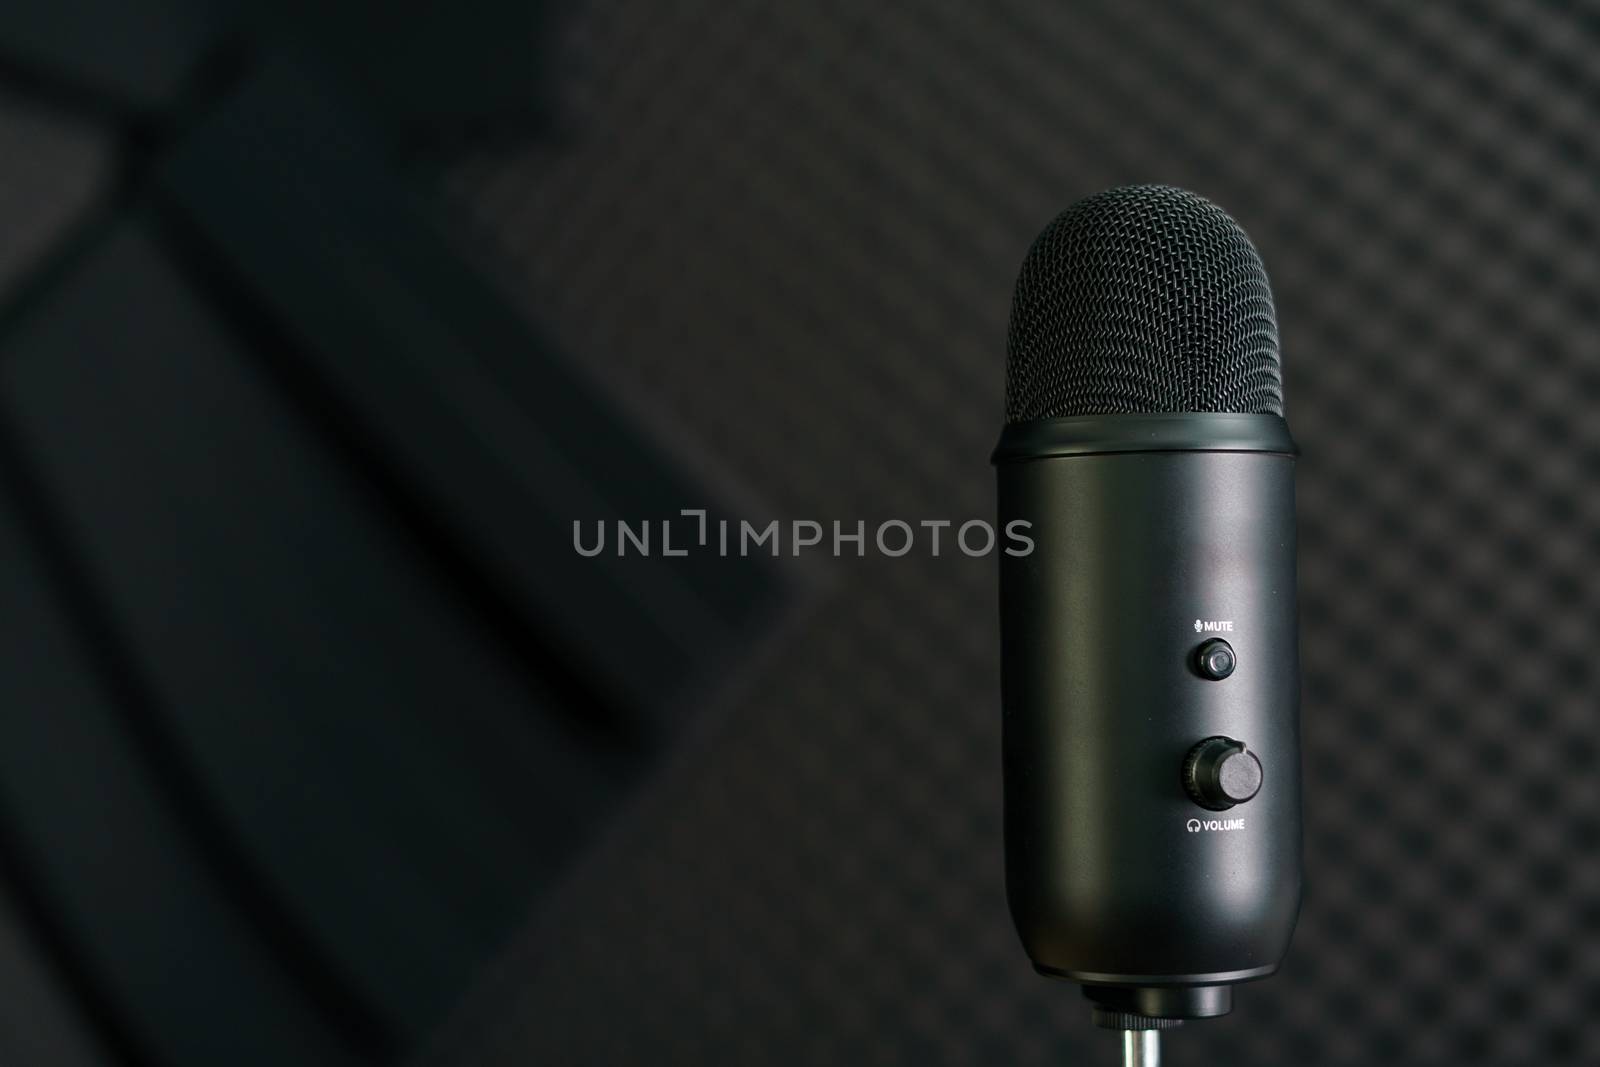 Close-up of professional condenser microphone on a black background.